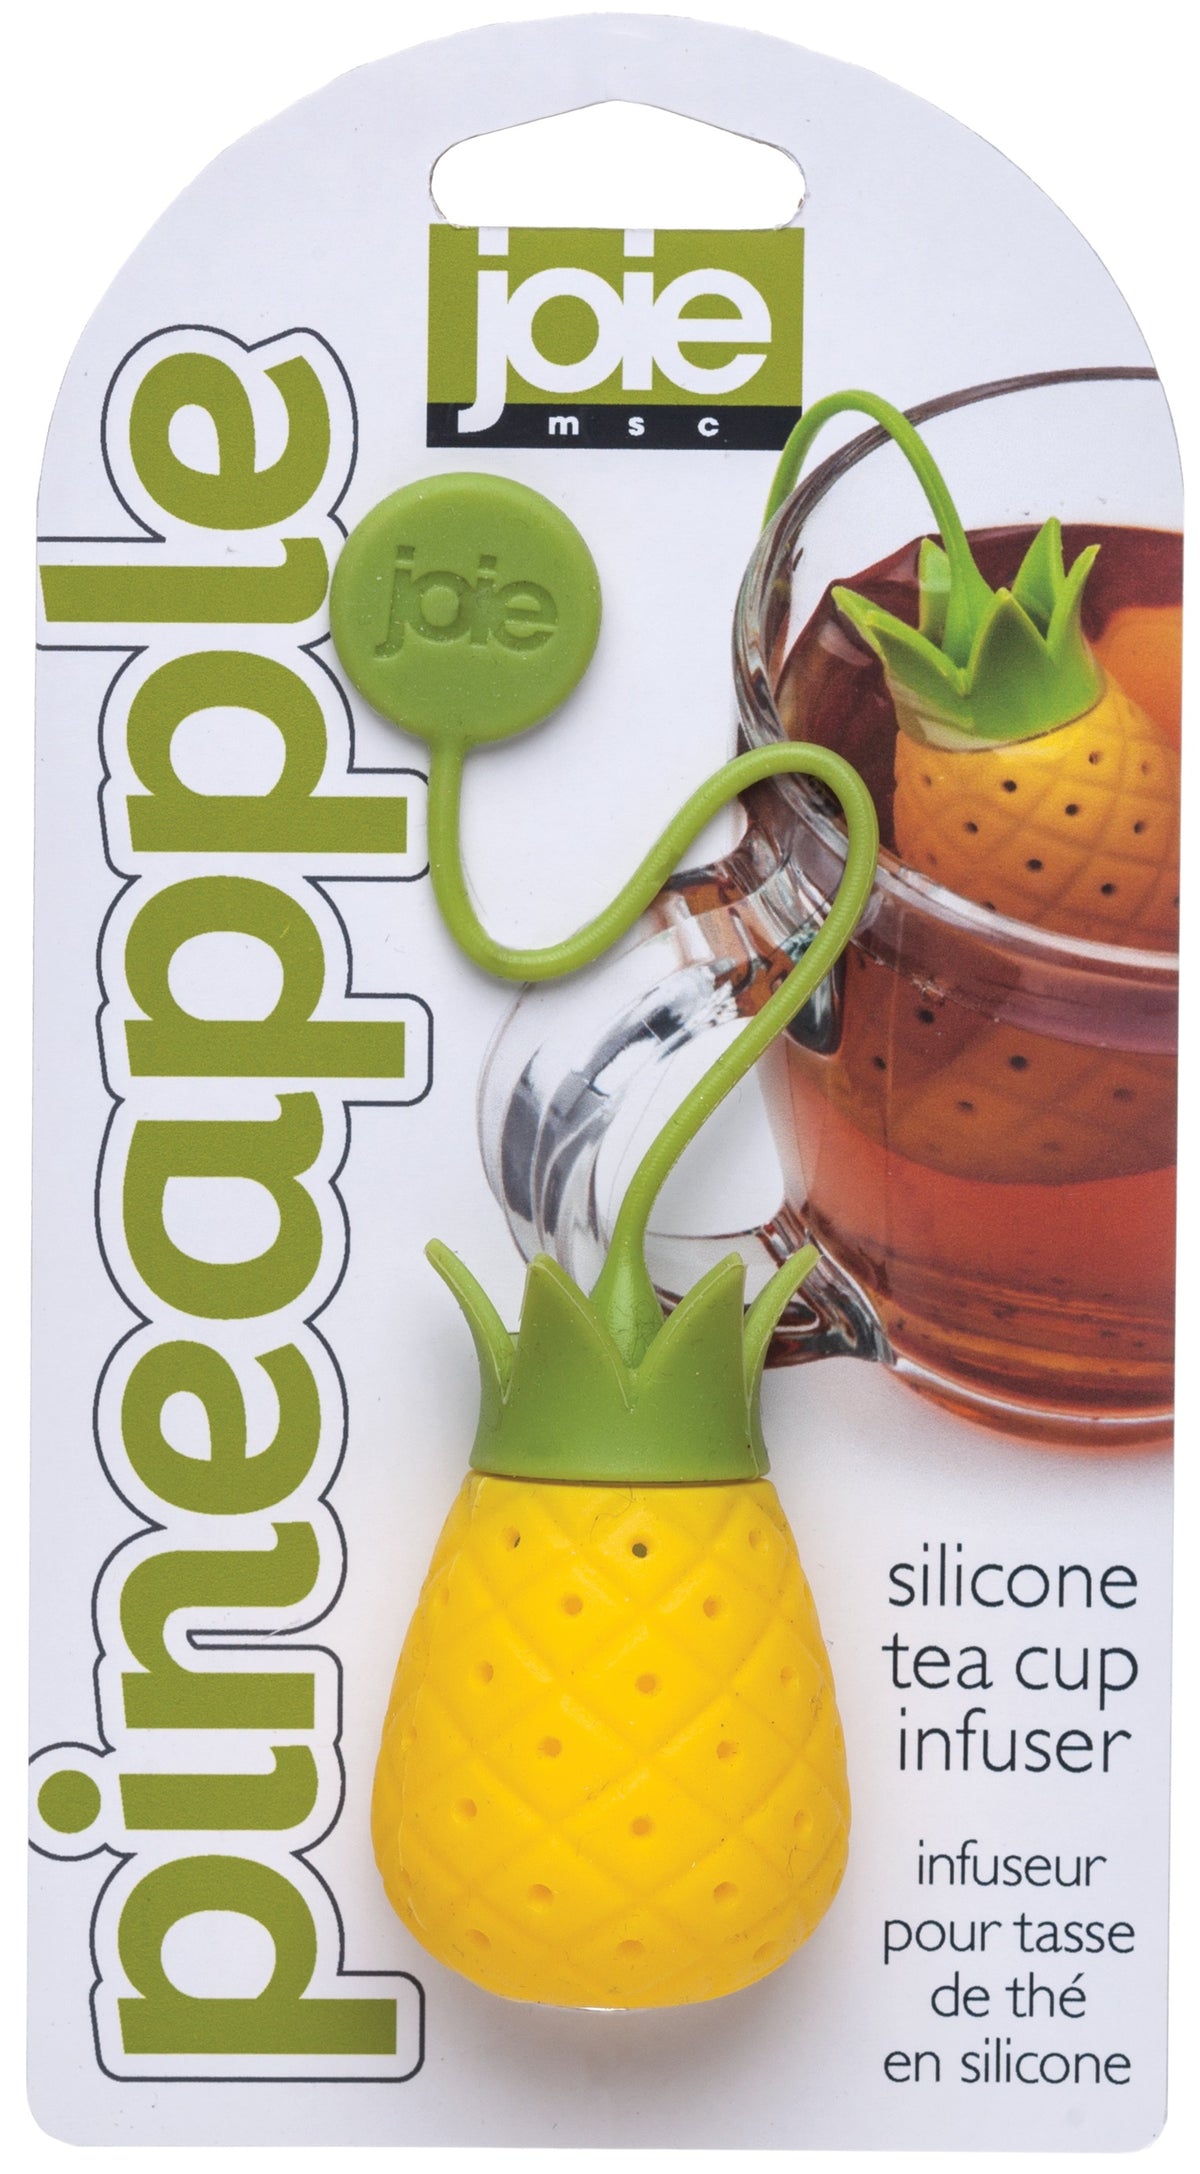 Joie MSC 10080 Pineapple Tea Infuser, Silicone